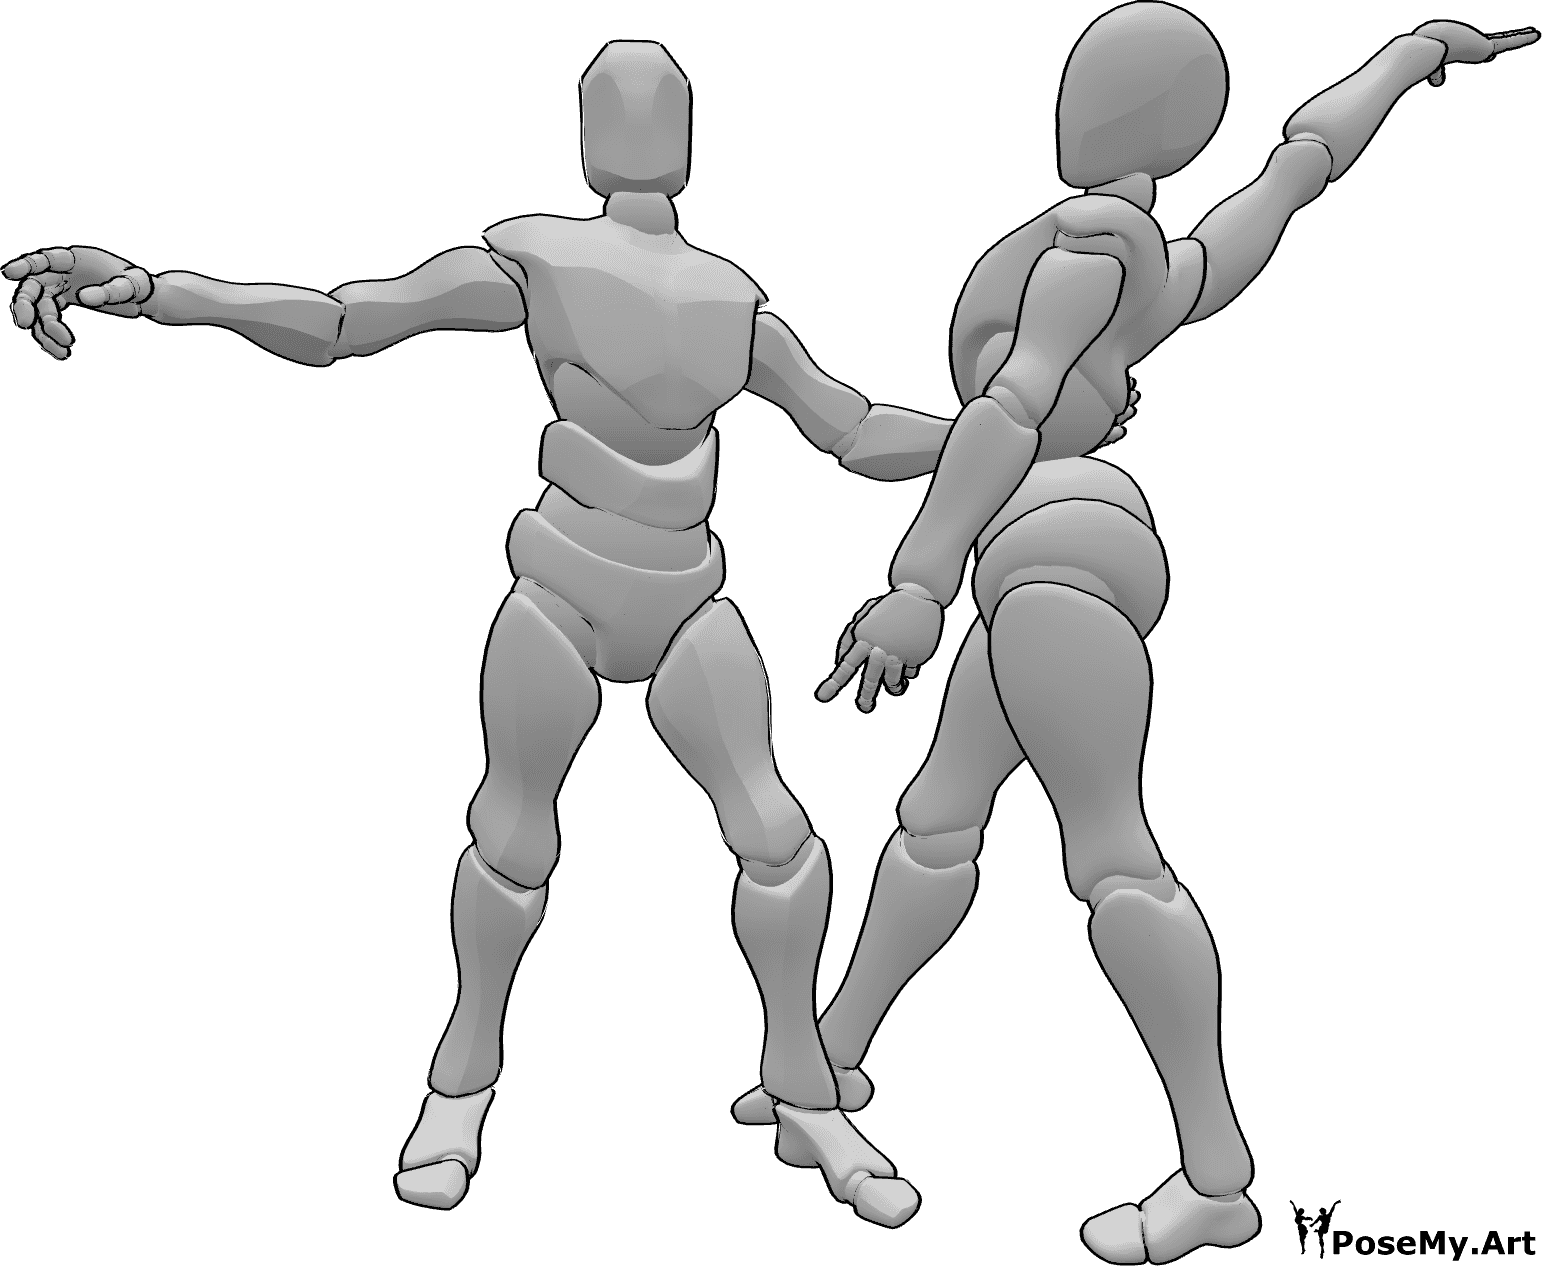 Pose Reference- Dancing holding hips pose - Female and male are dancing, holding each other and posing